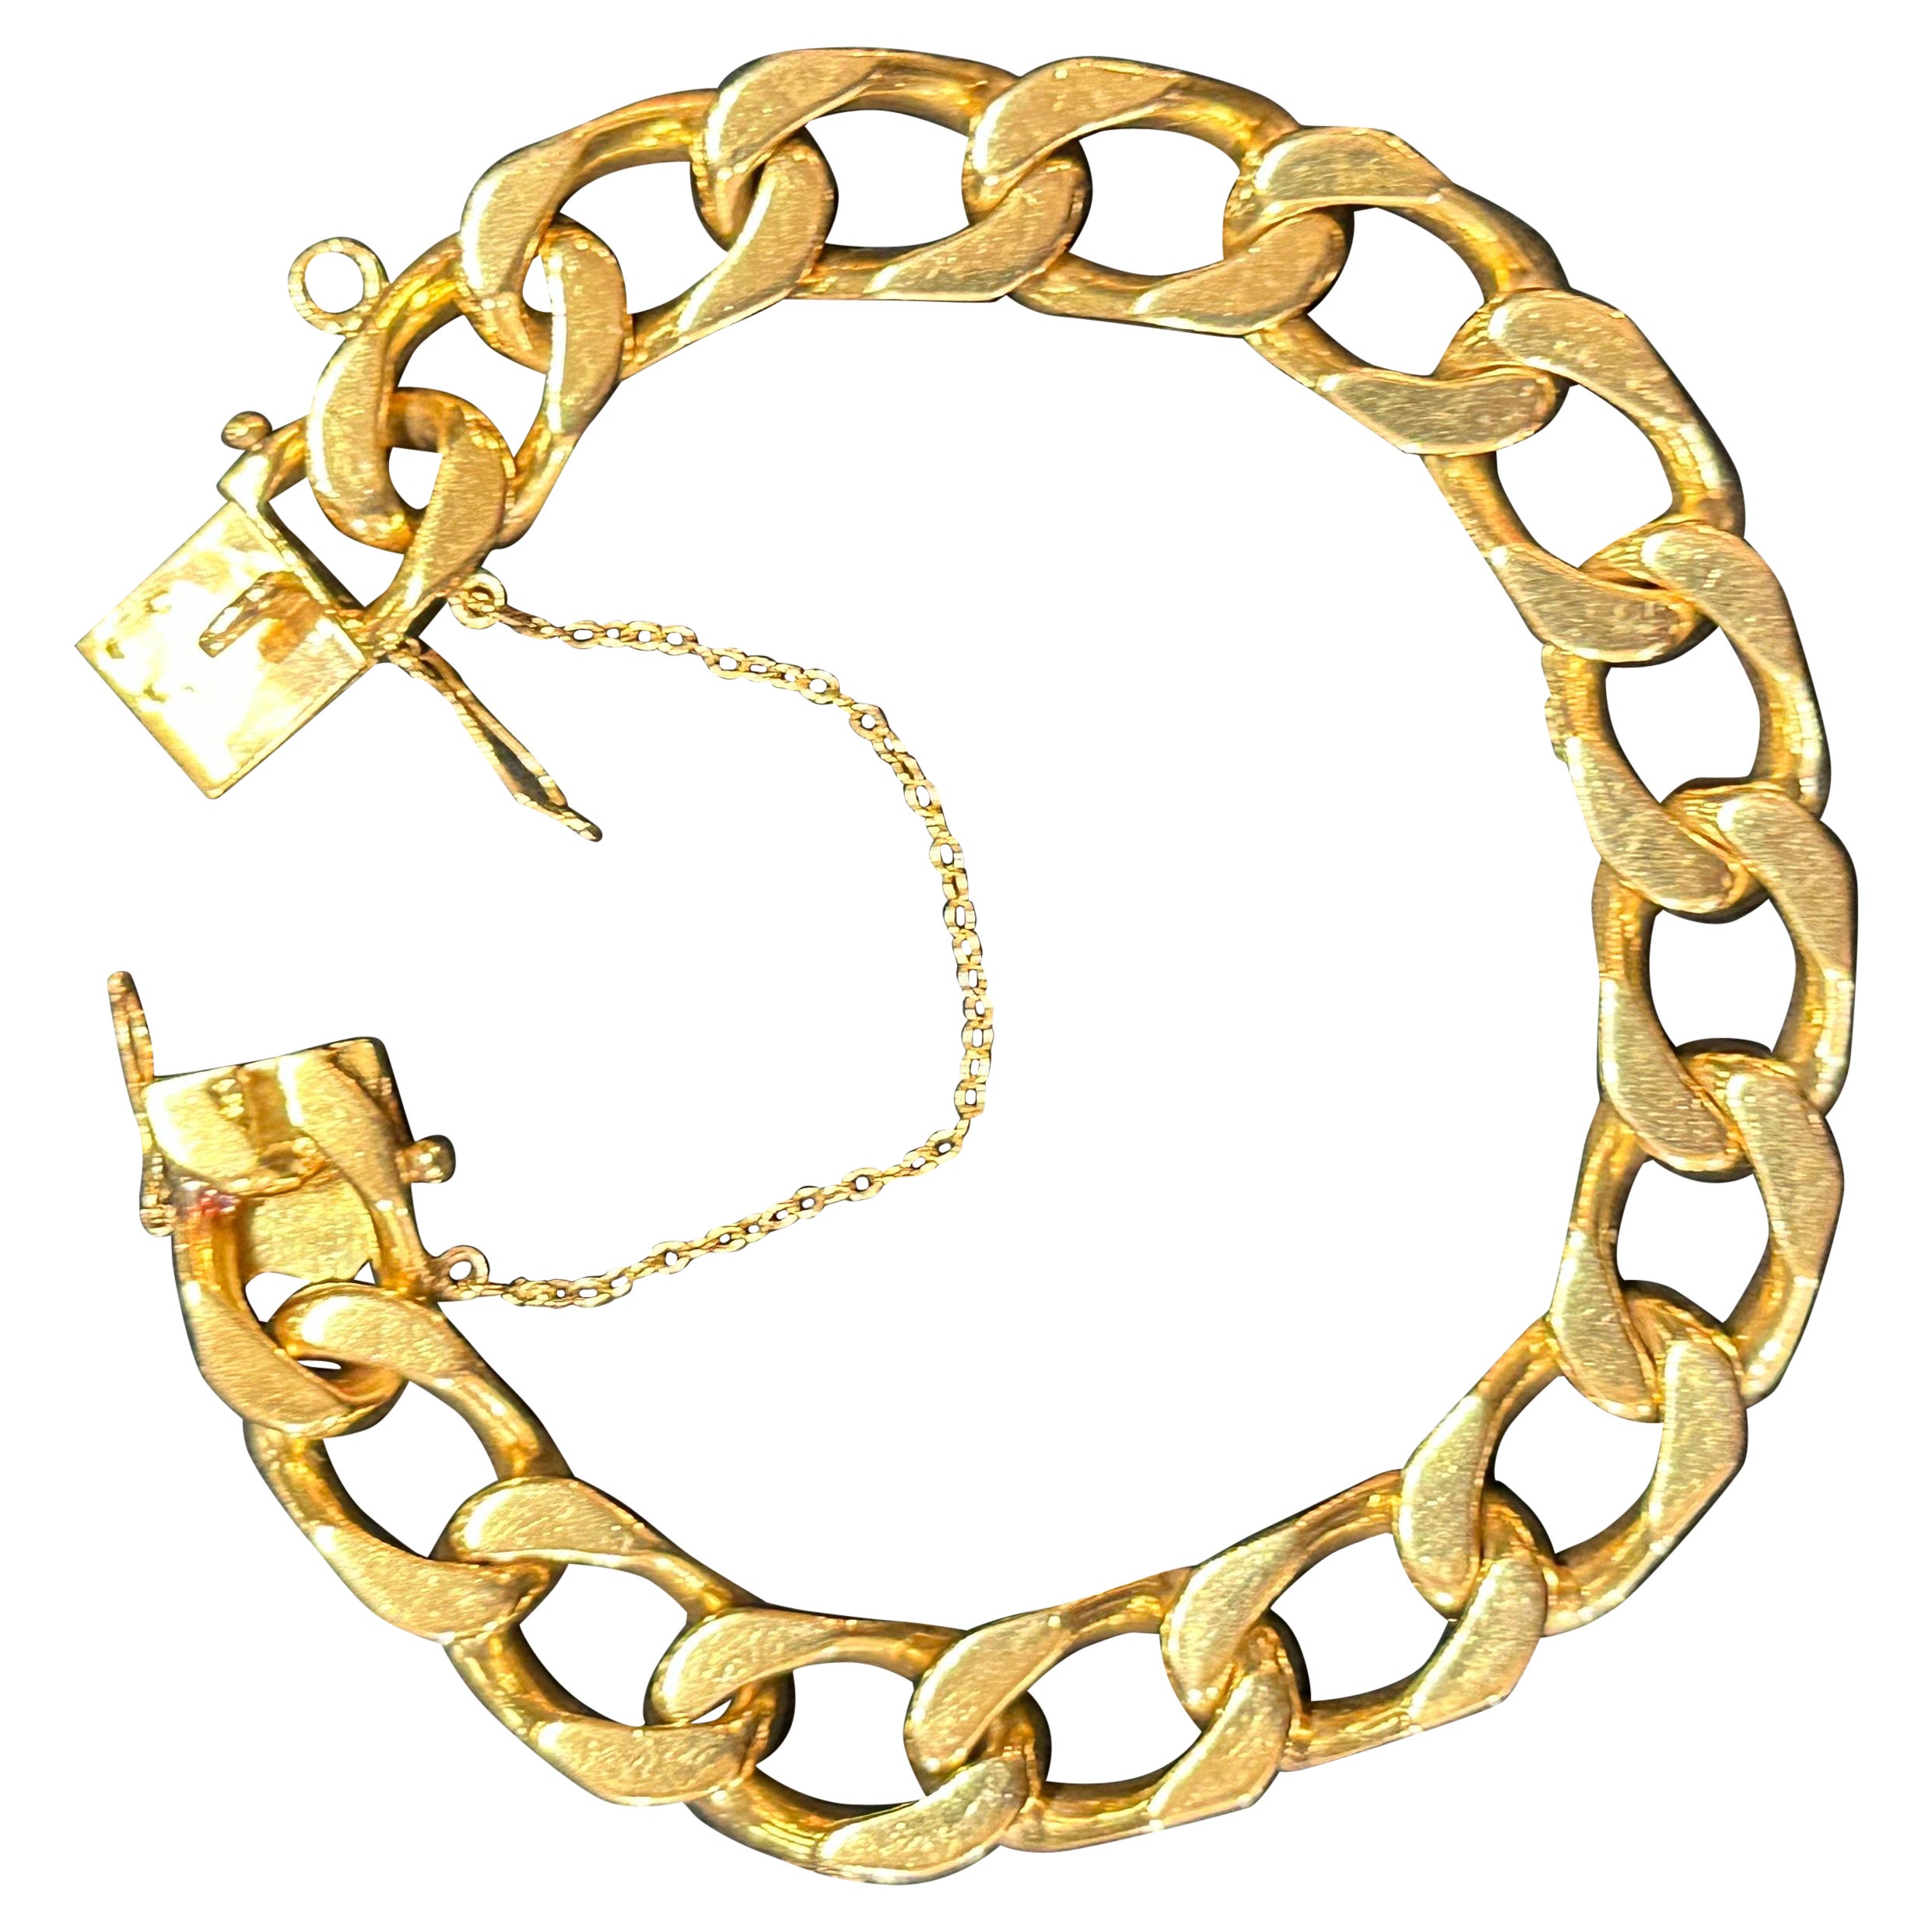 Bracelet Mesh Gourmette Year 1960 Solid Gold 18 Carats